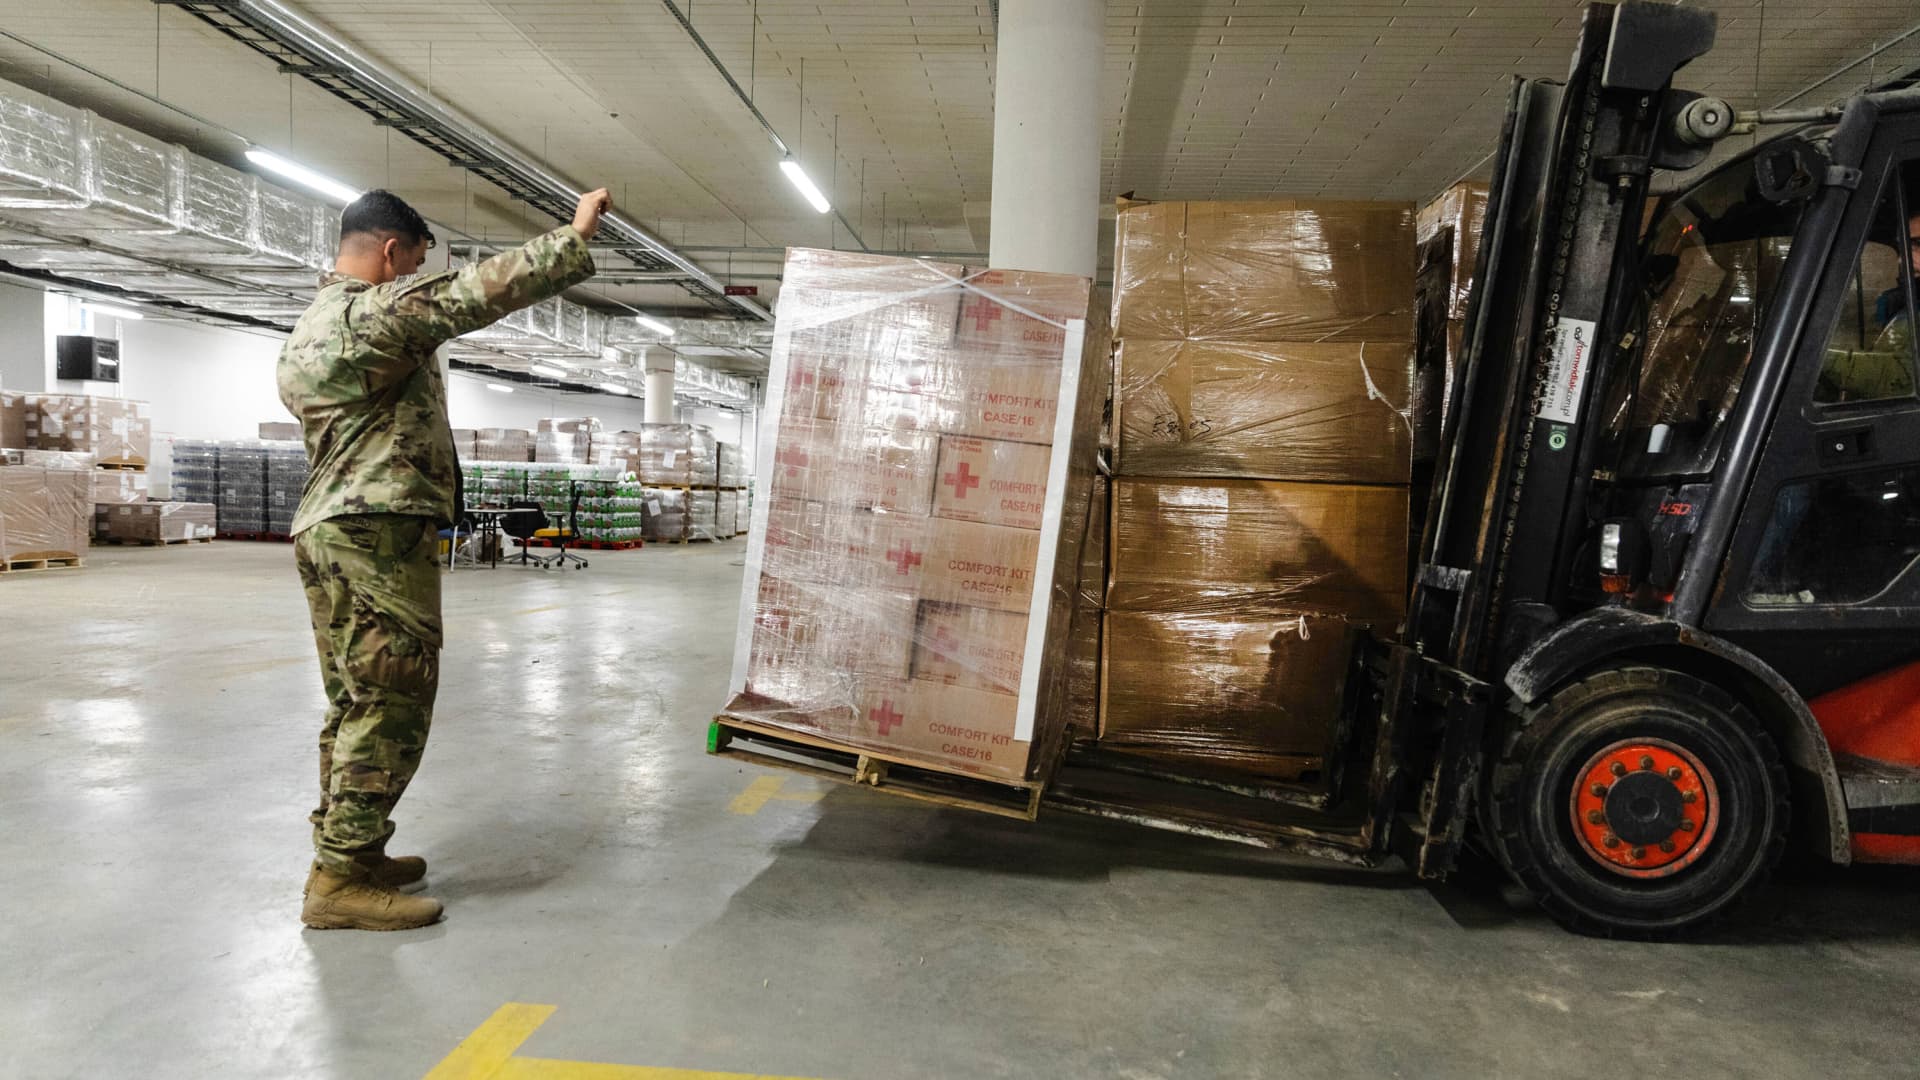 Paratroopers assigned to the 82nd Airborne Division, assist with unloading humanitarian goods in support of the United States Agency for International Development (USAID) in preparation of potential evacuees from Ukraine at the G2A Arena in Jasionka, Poland, on Feb. 25, 2022.